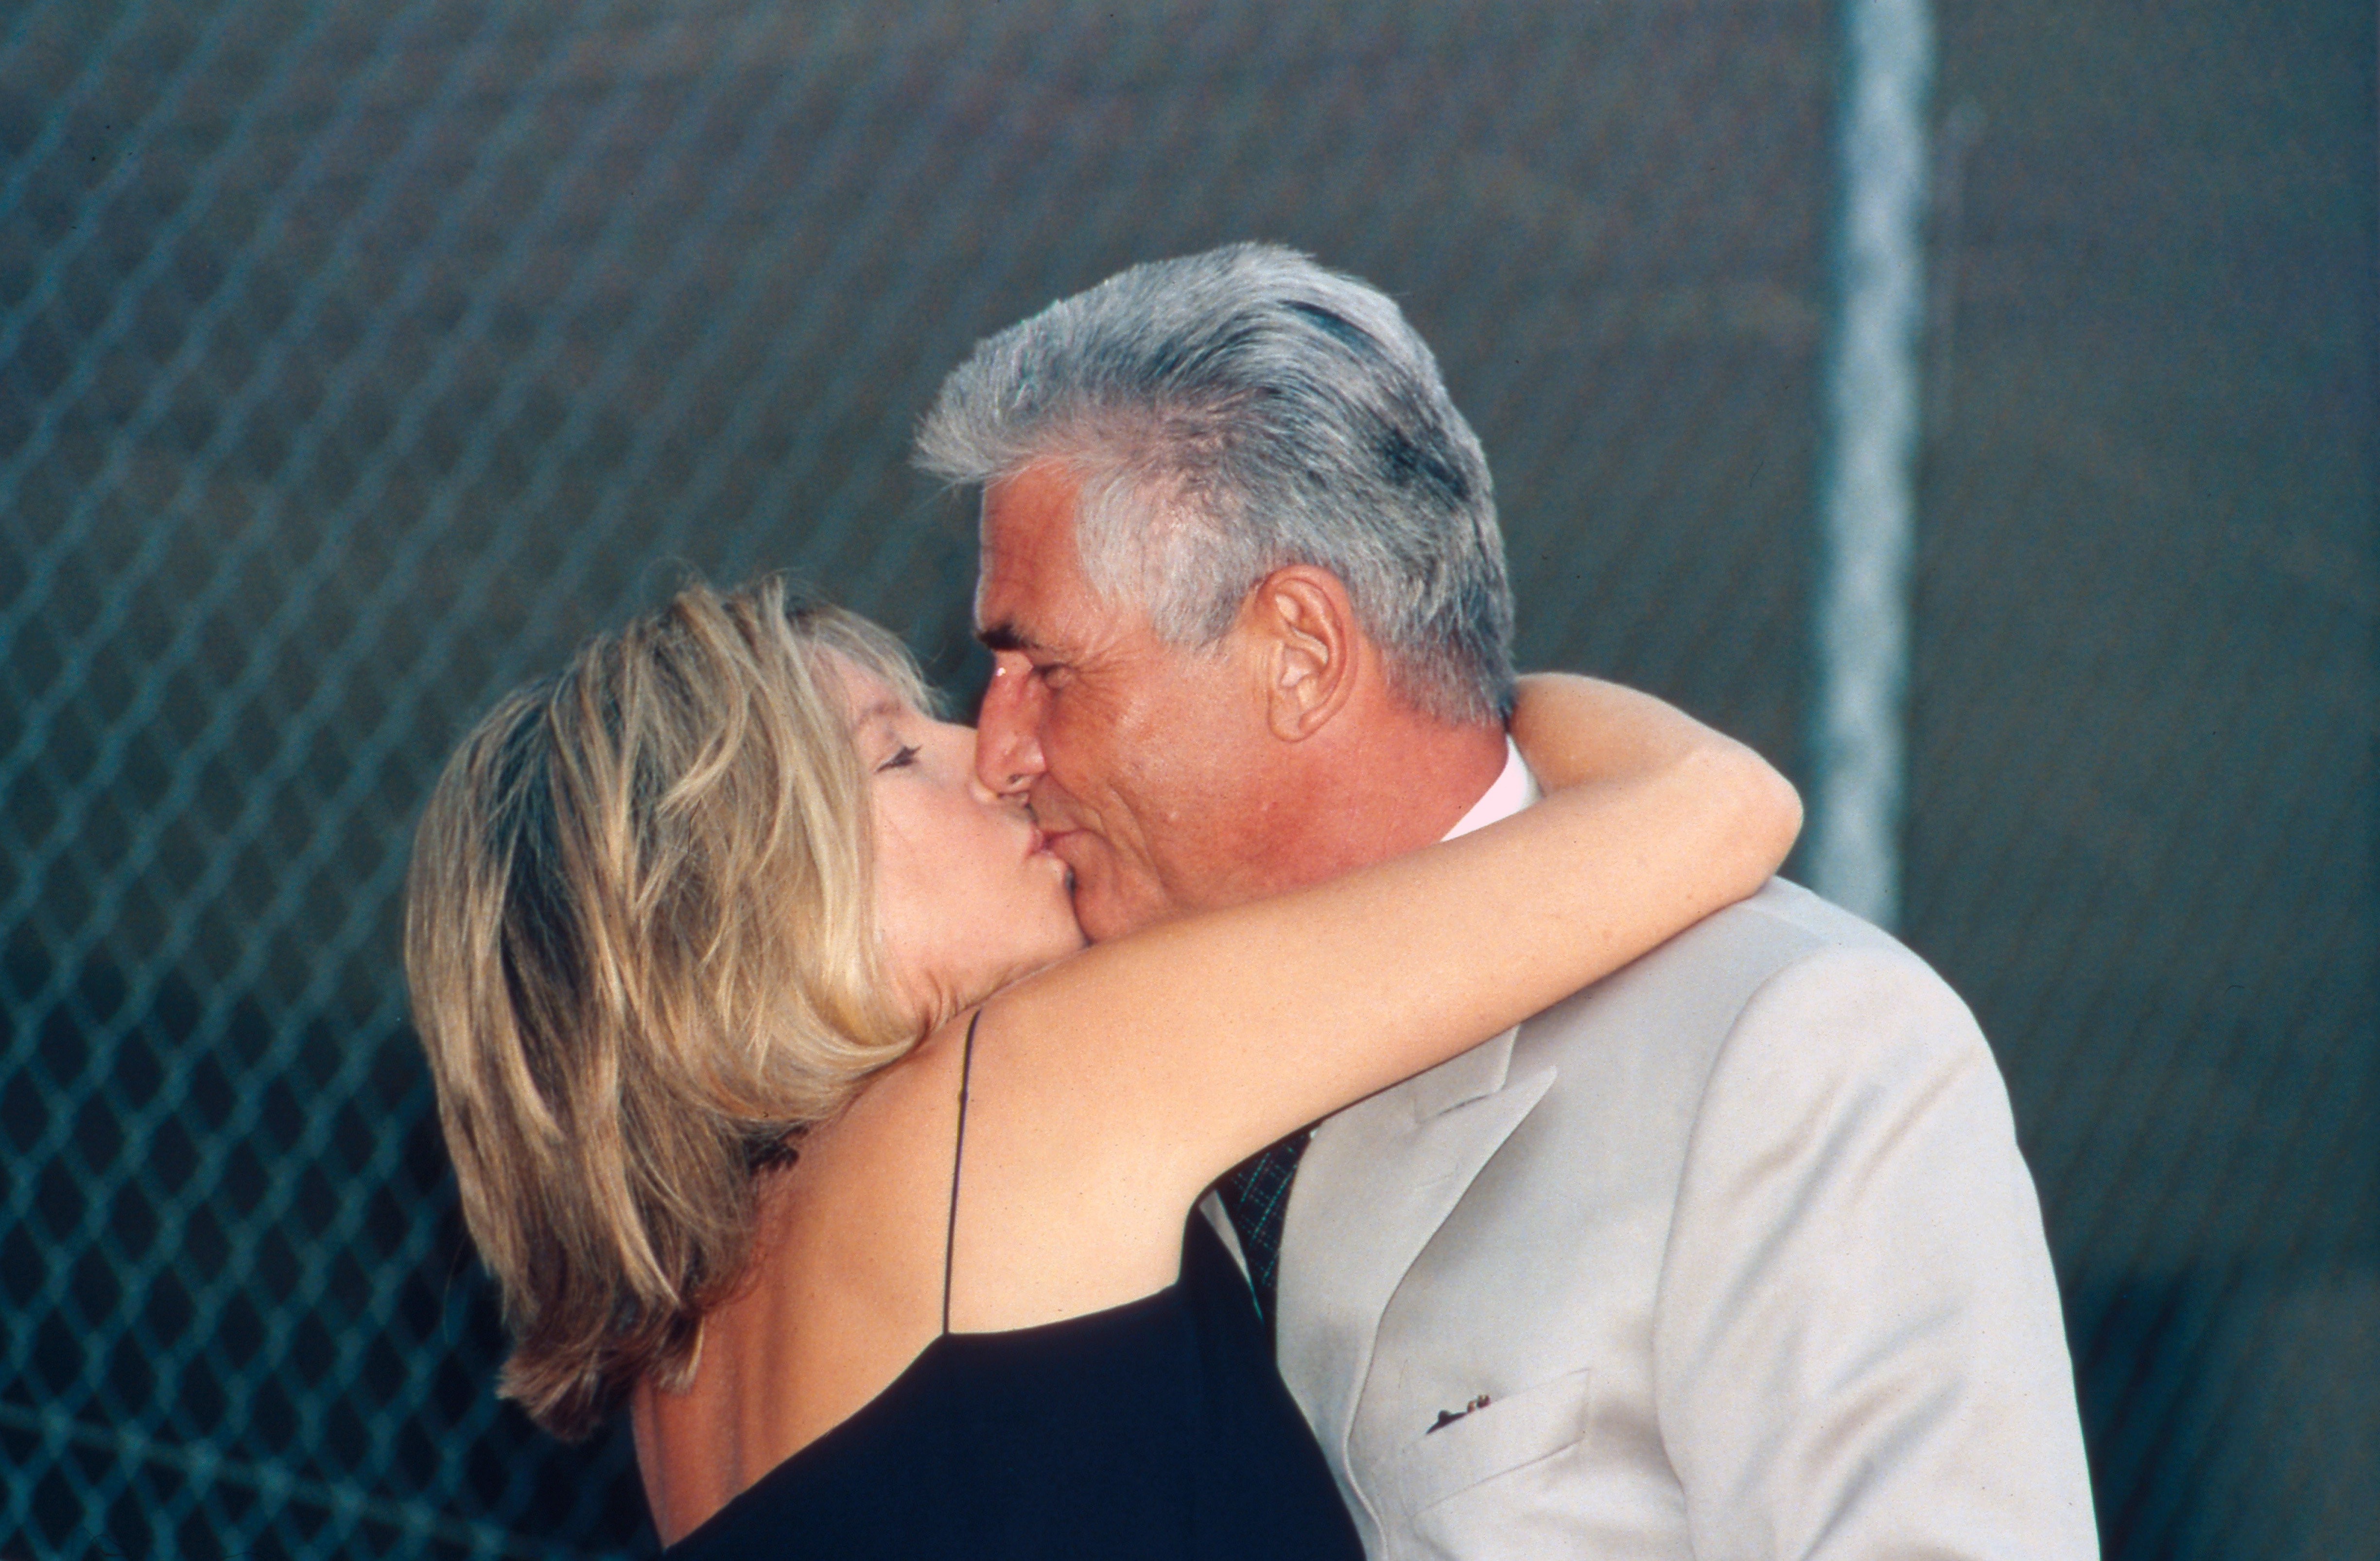 Barbra Streisand and James Brolin in Los Angeles, California, in 1998 | Source: Getty Images